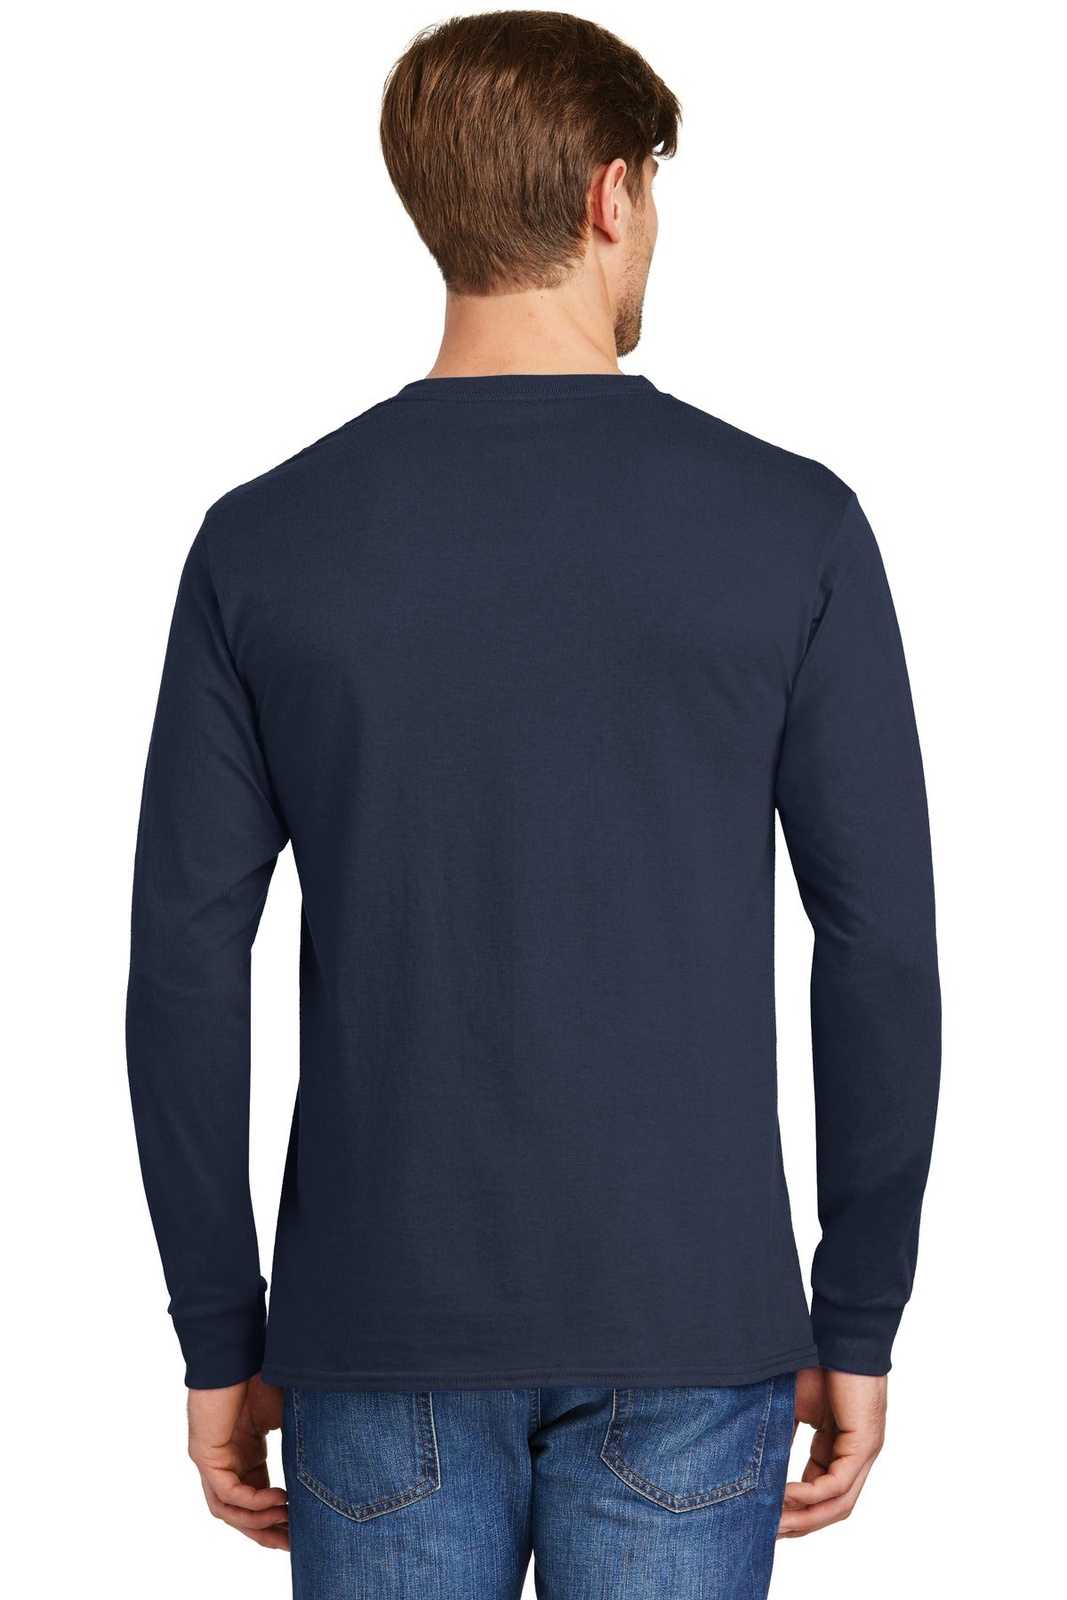 Hanes 5586 Tagless 100% Cotton Long Sleeve T-Shirt - Navy - HIT a Double